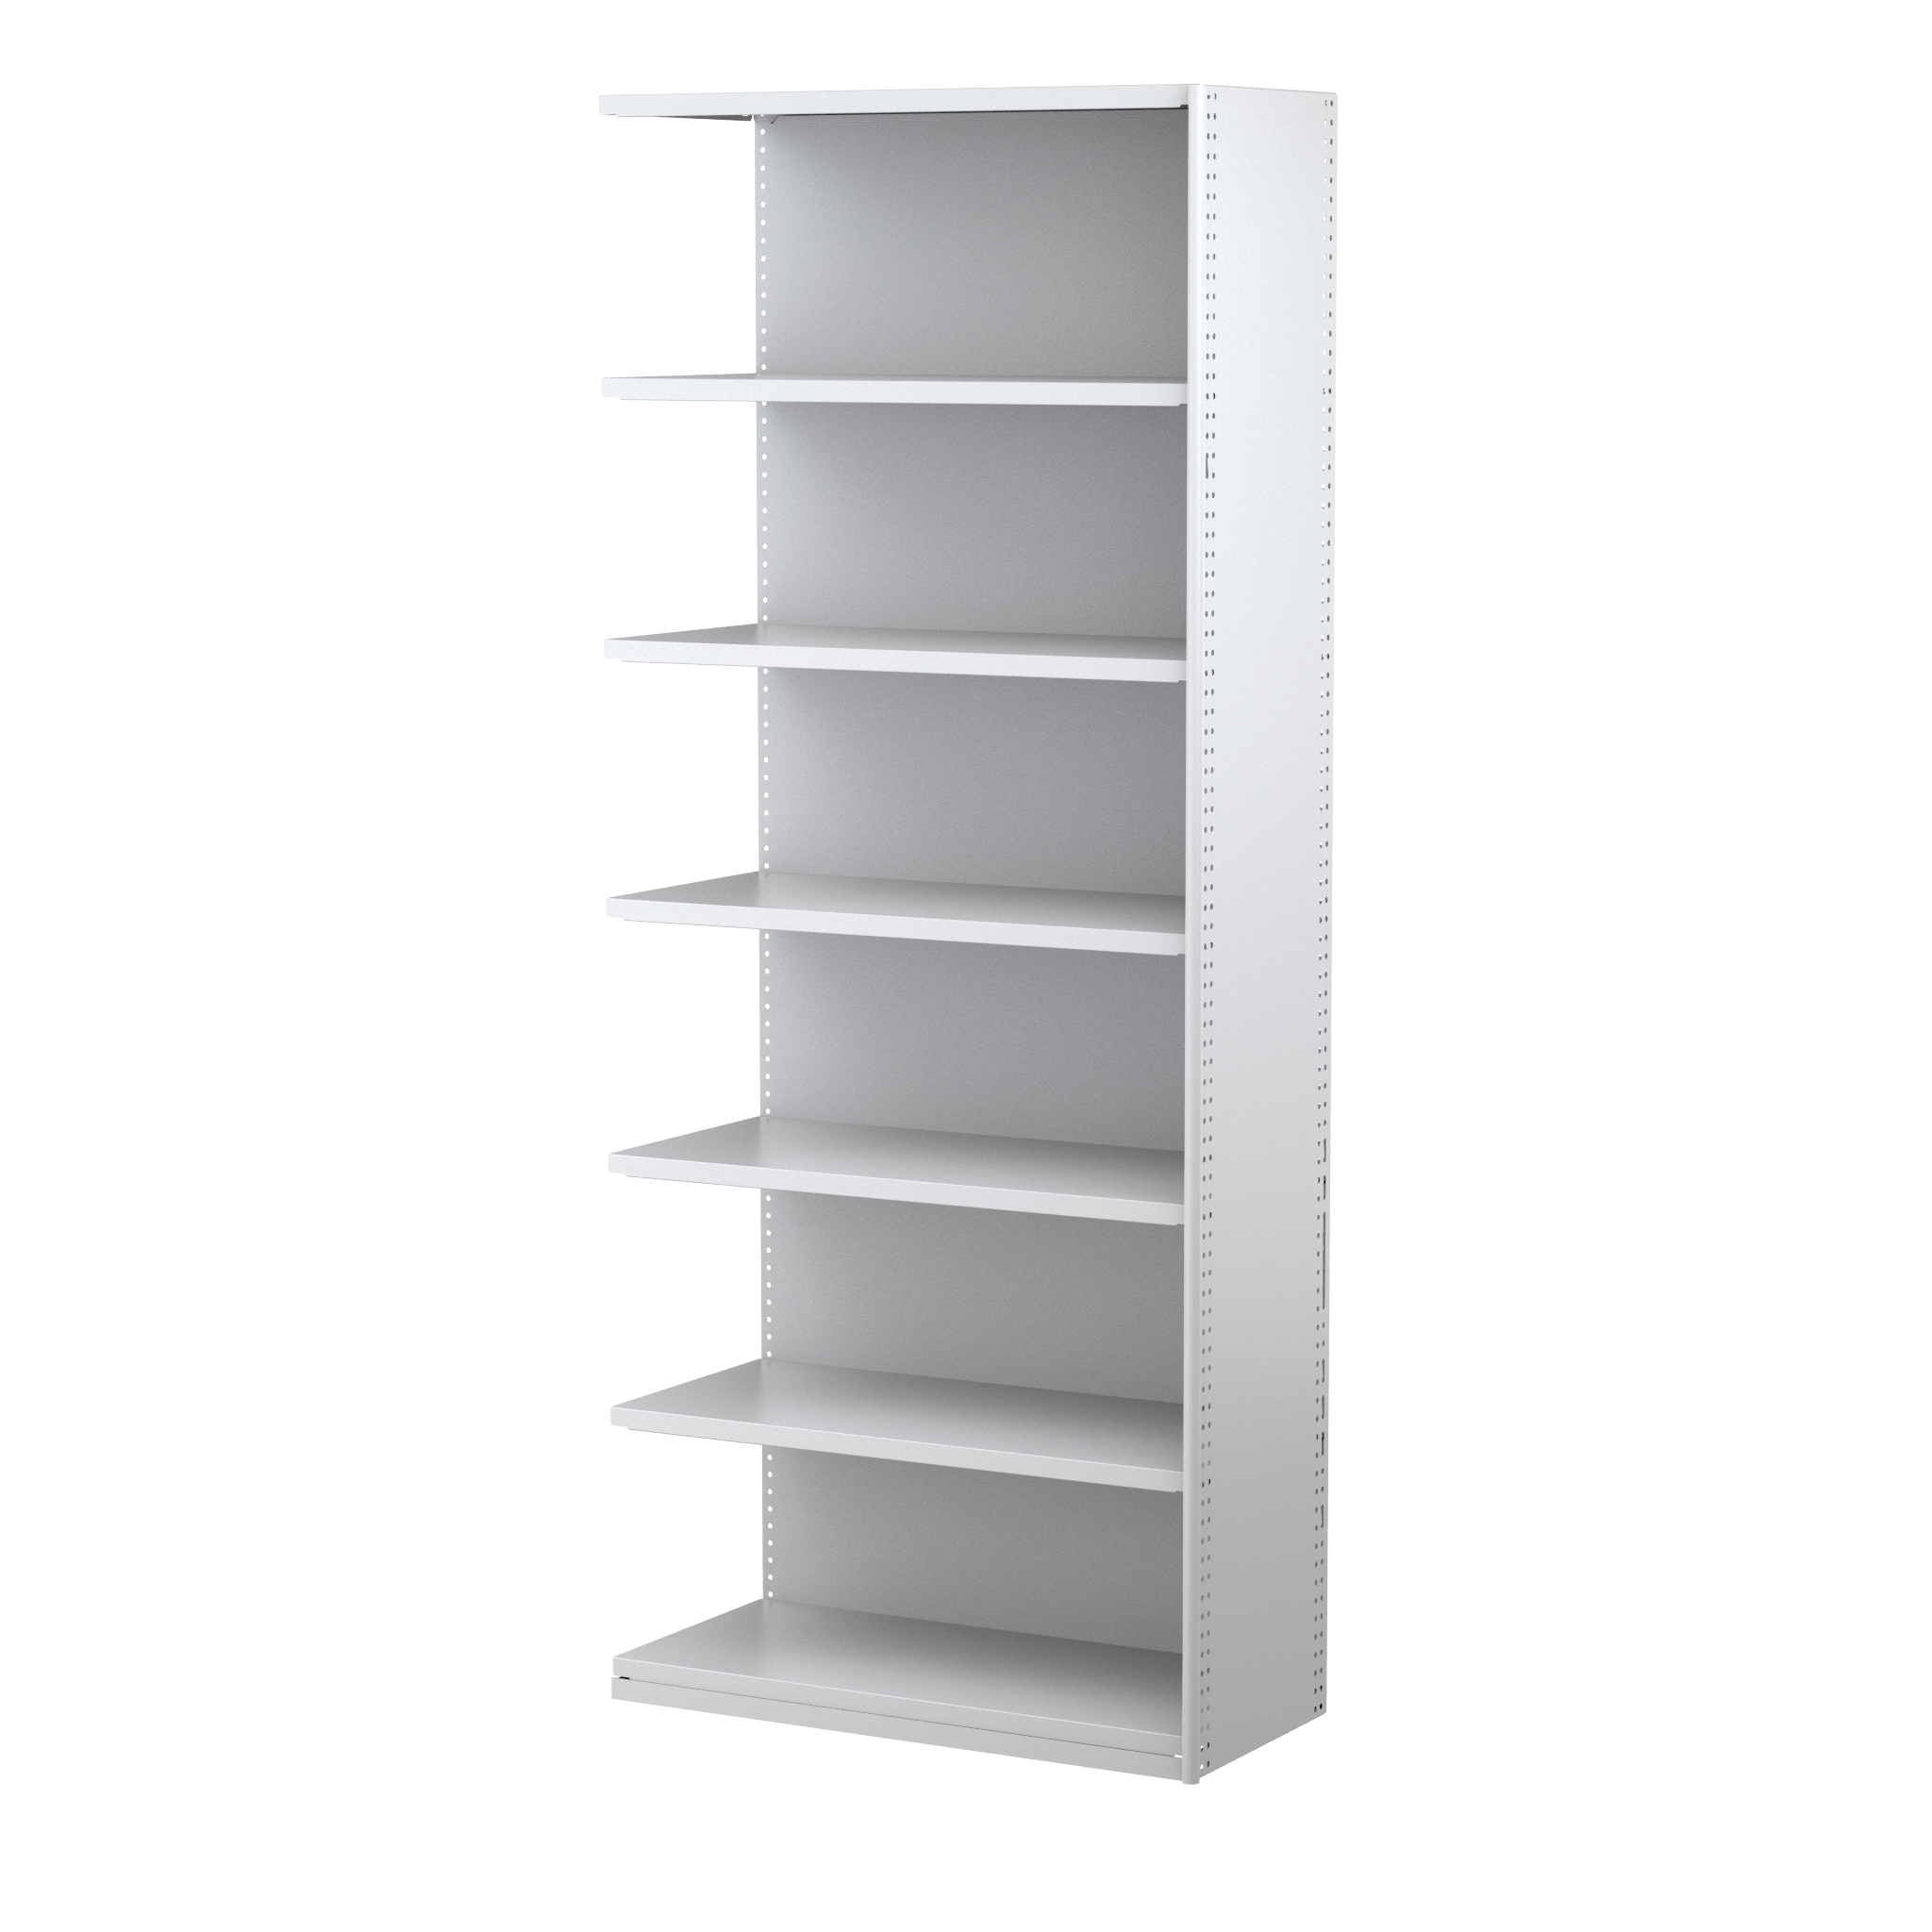 UNIS900_400_ADD - APC UNI-Shelving 2175H x 900W x 400D - Add on Bay-WS.png